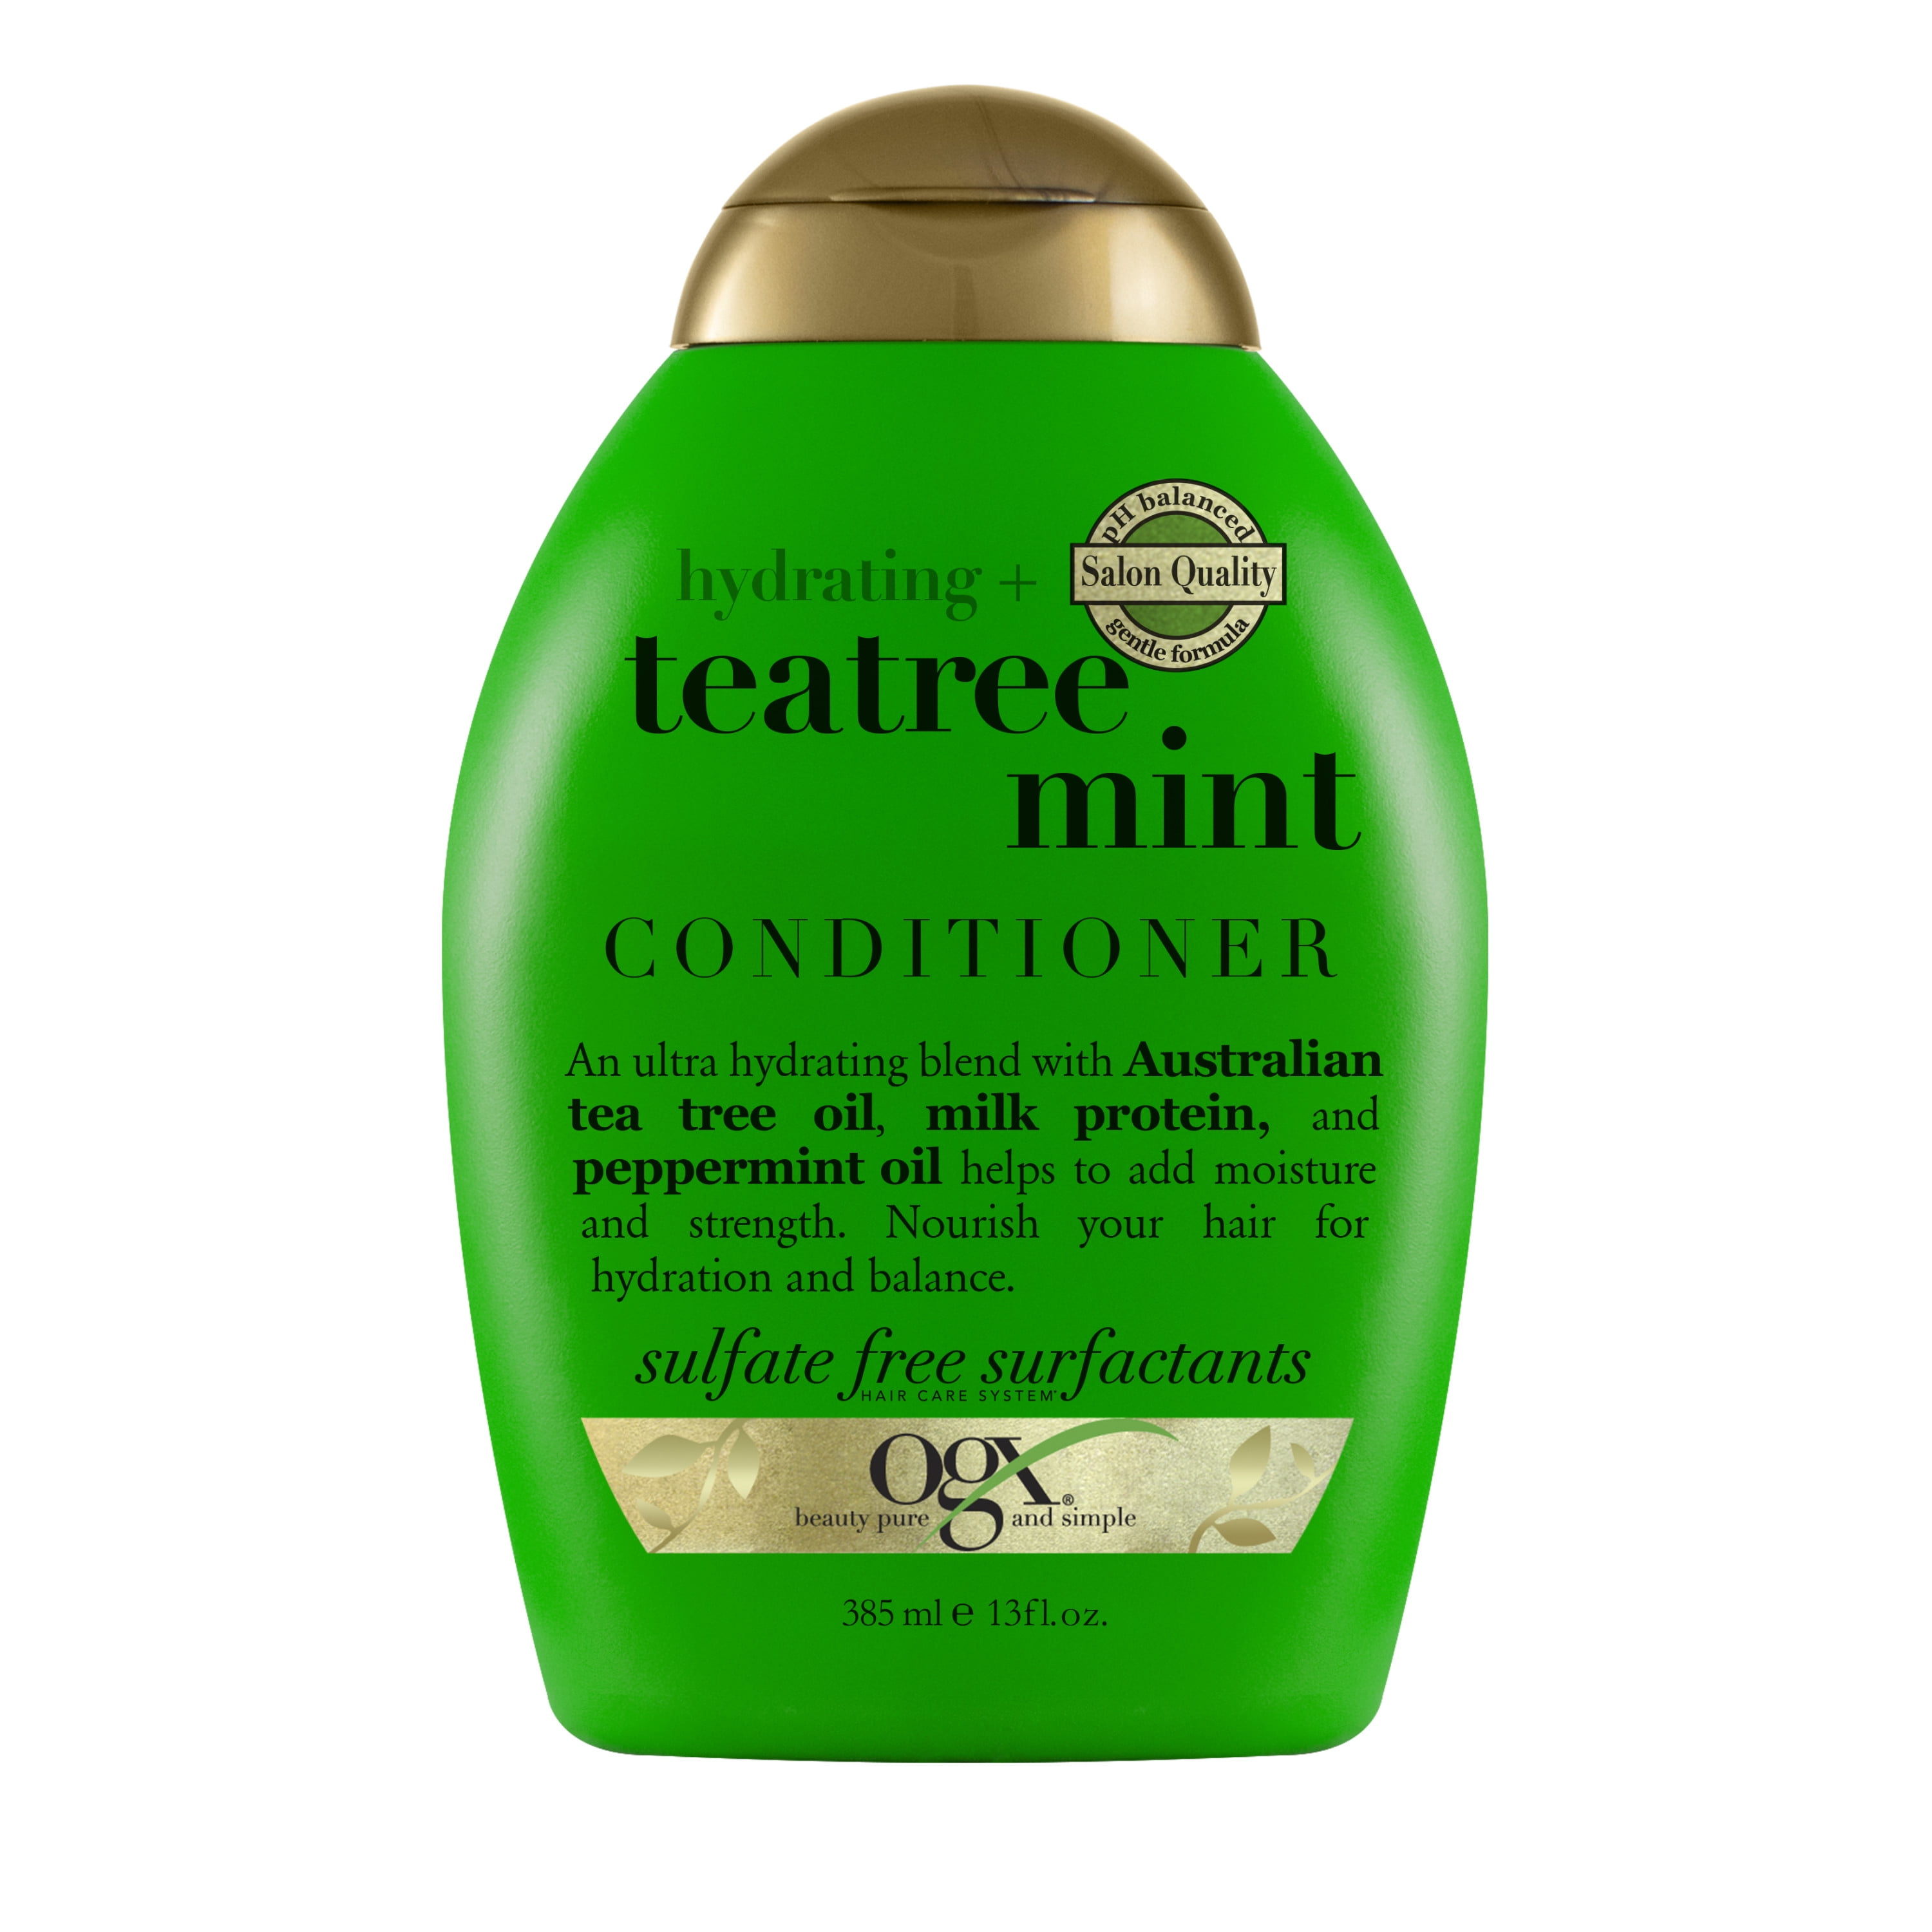 OGX Hydrating + Tea Tree Mint Nourishing & Invigorating Daily Conditioner with Peppermint Oil & Milk Proteins, 13 fl oz